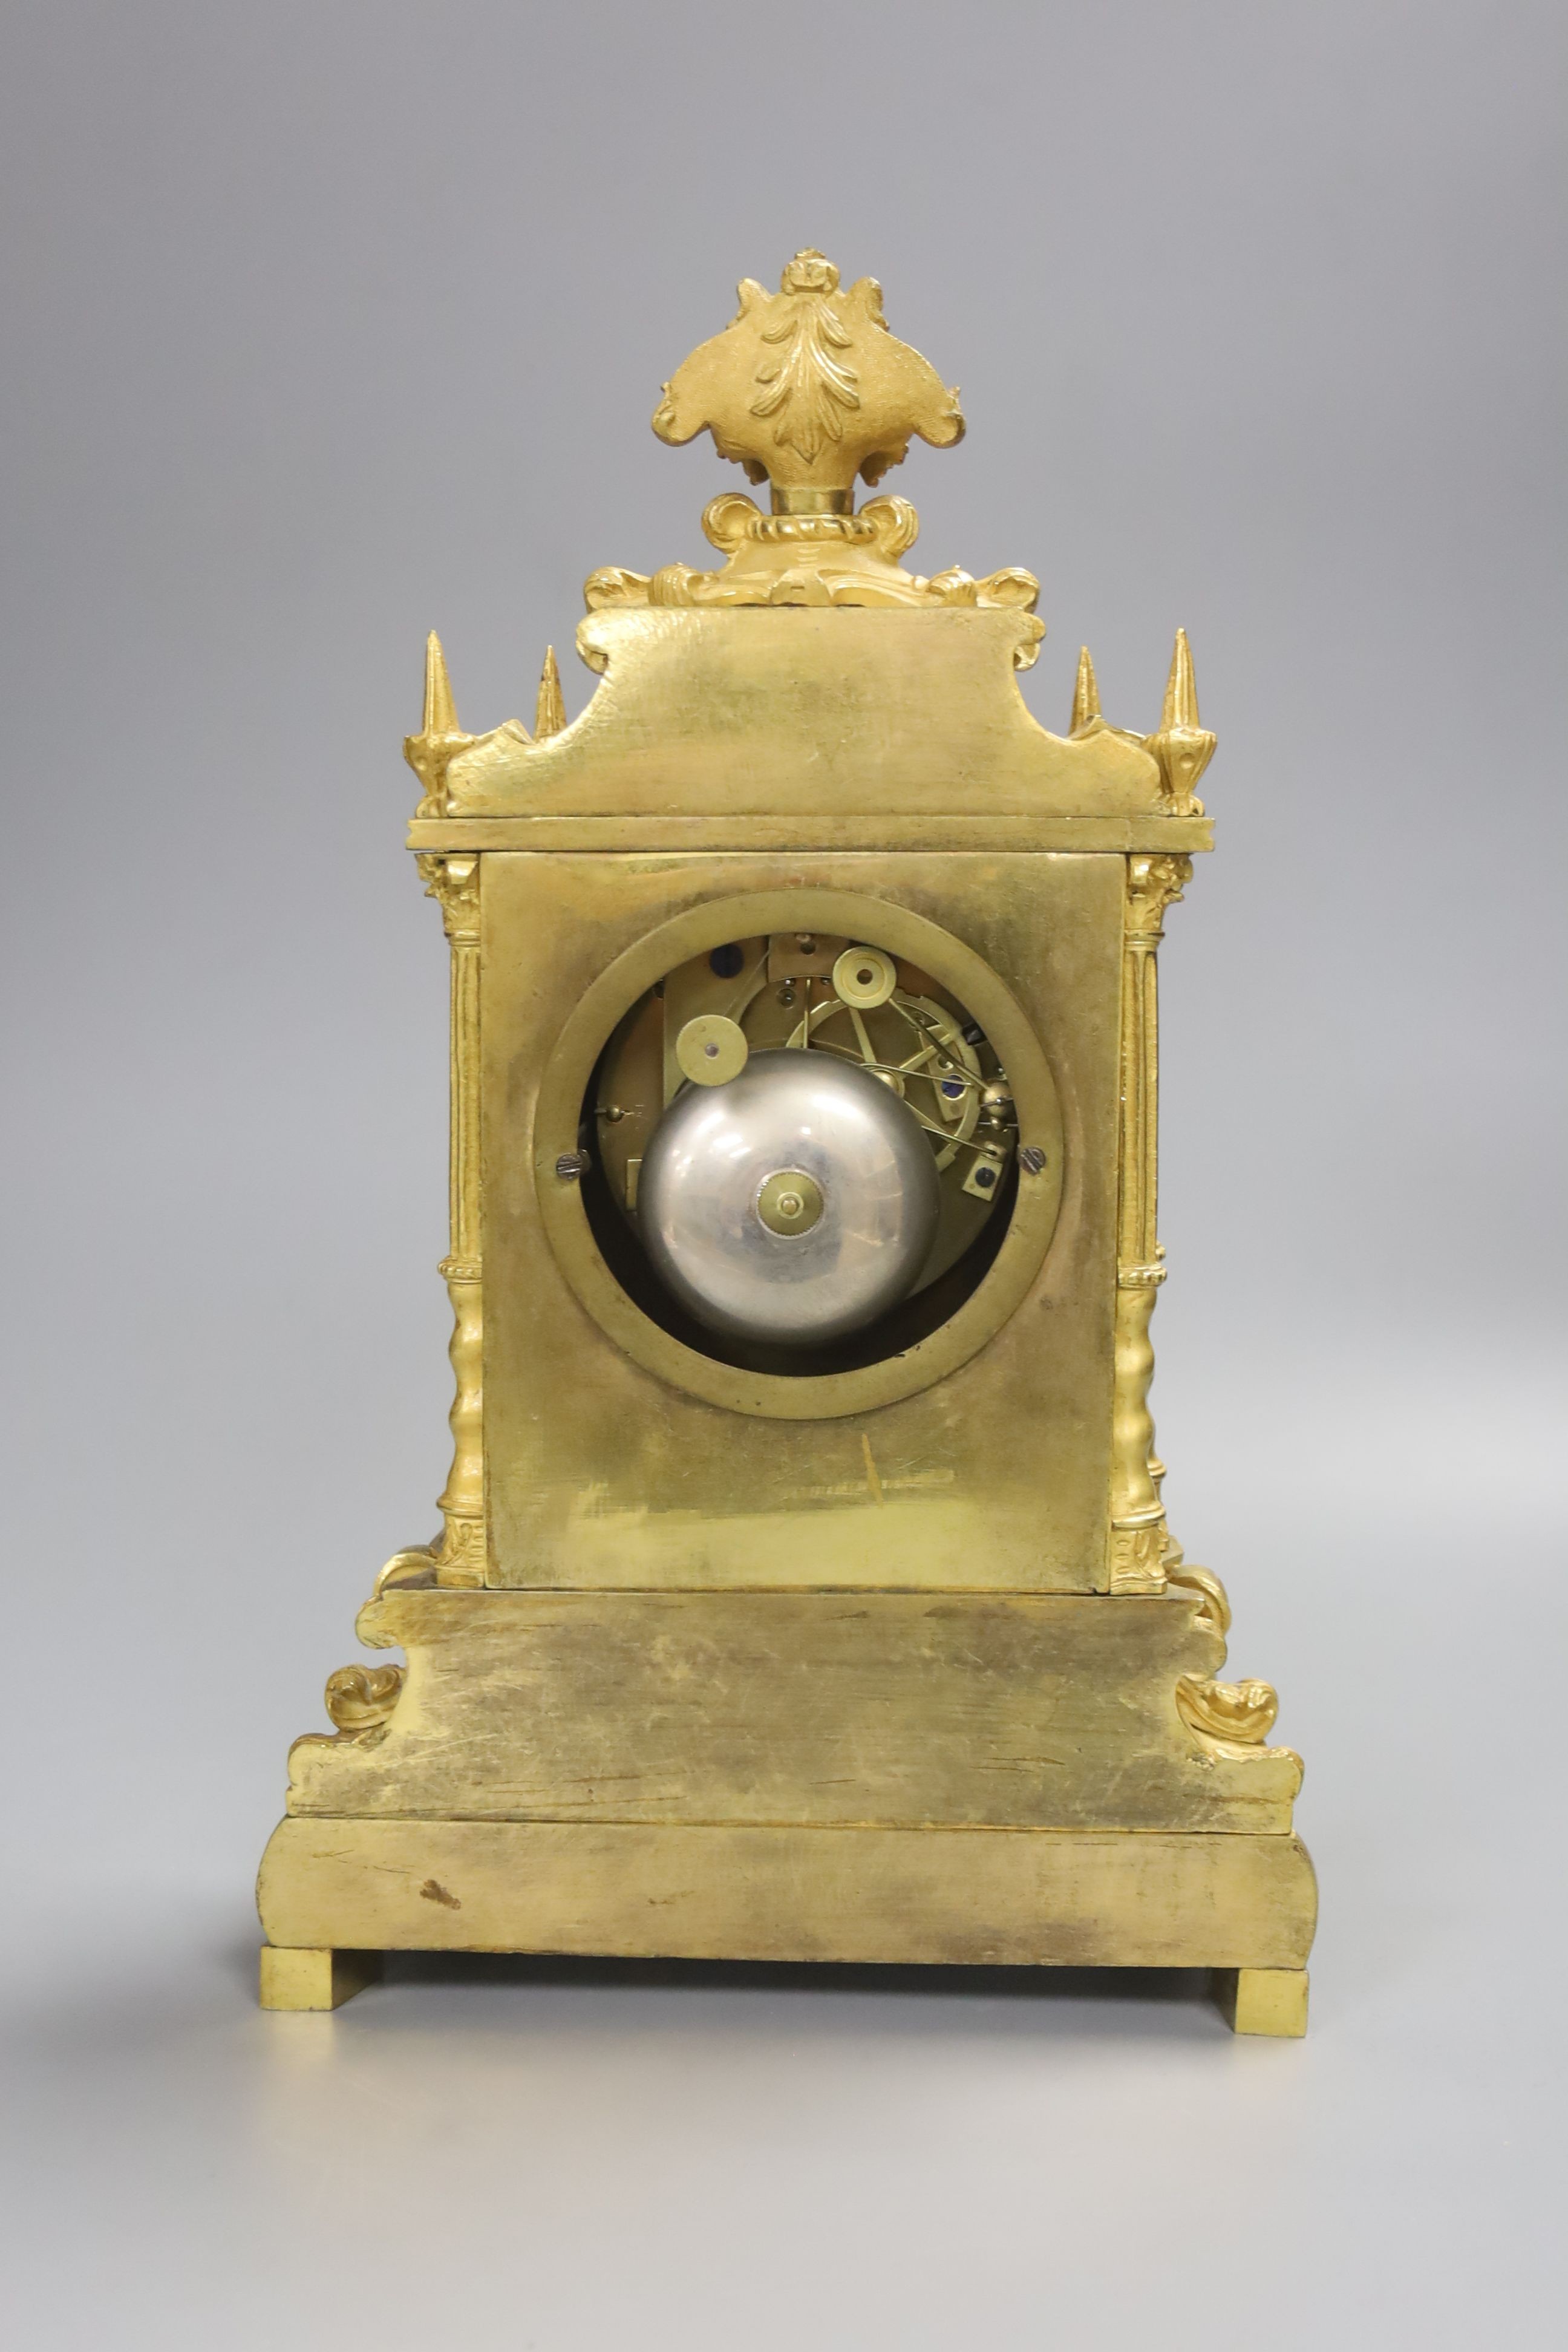 A mid 19th century French gilt bronze mantel clock, dial signed Le Roy & Fils, Paris, Japy movement, height 31cm